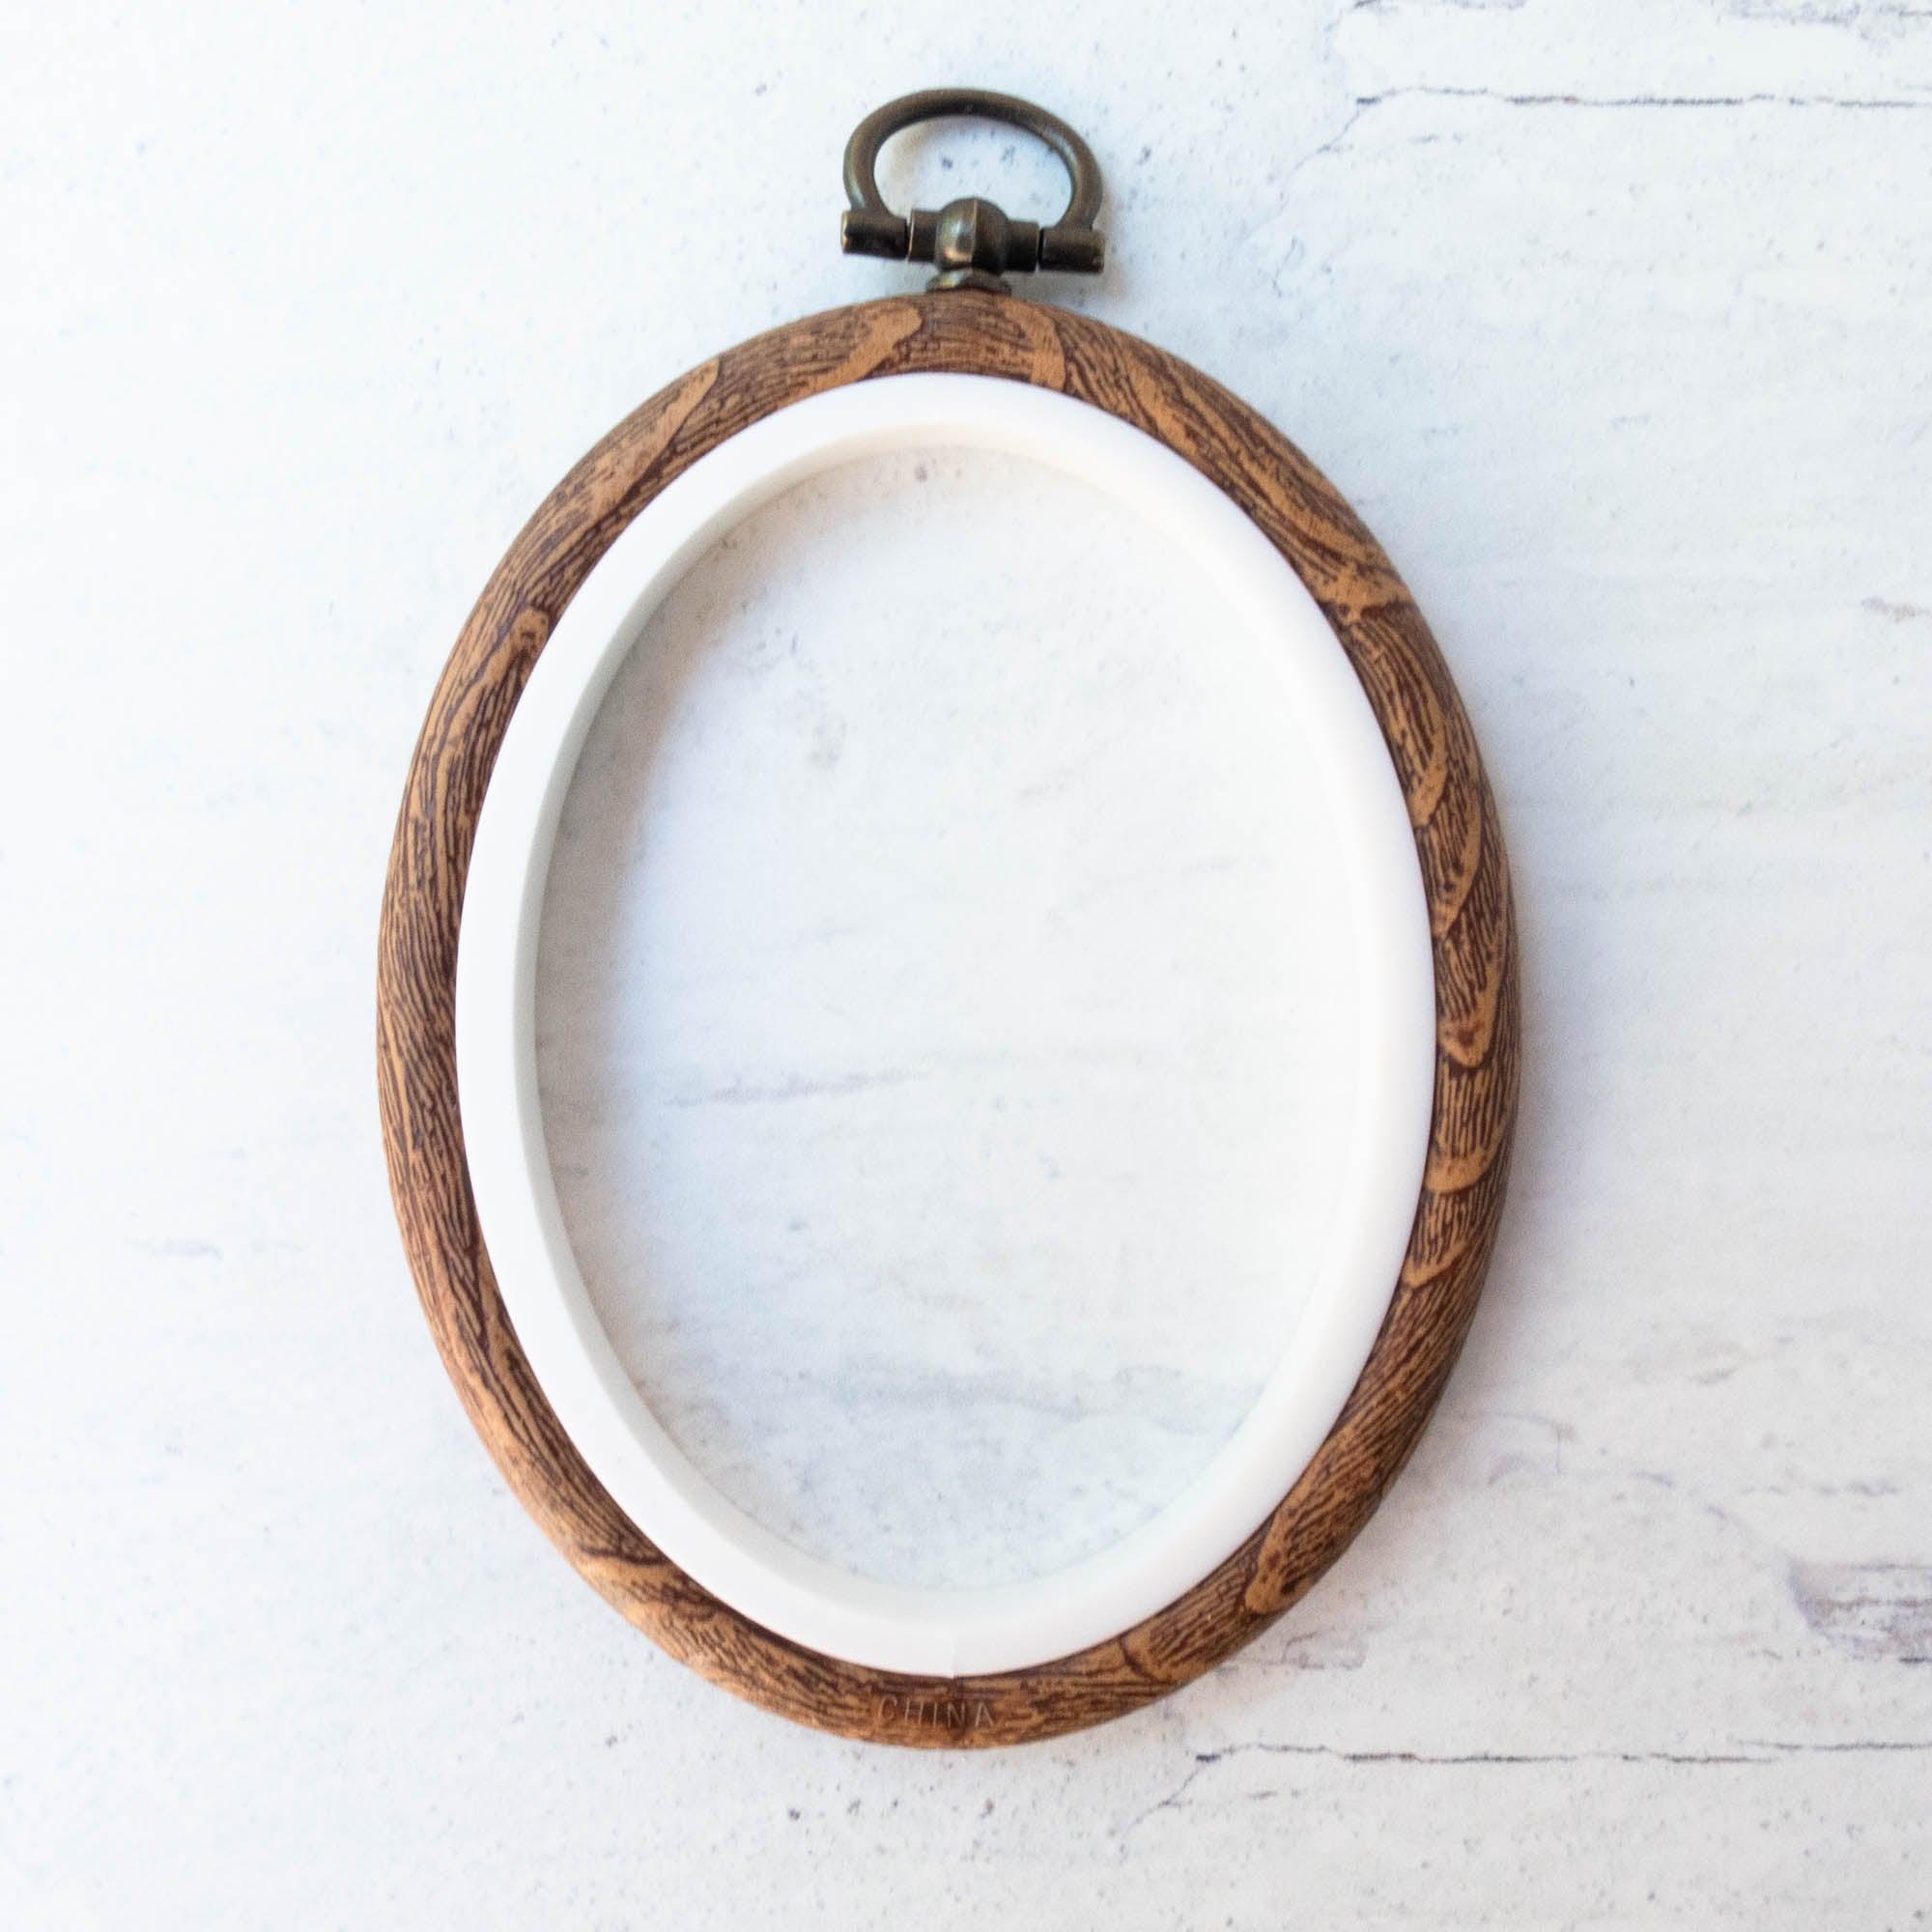 Oval Embroidery Frame - 5 x 3.75